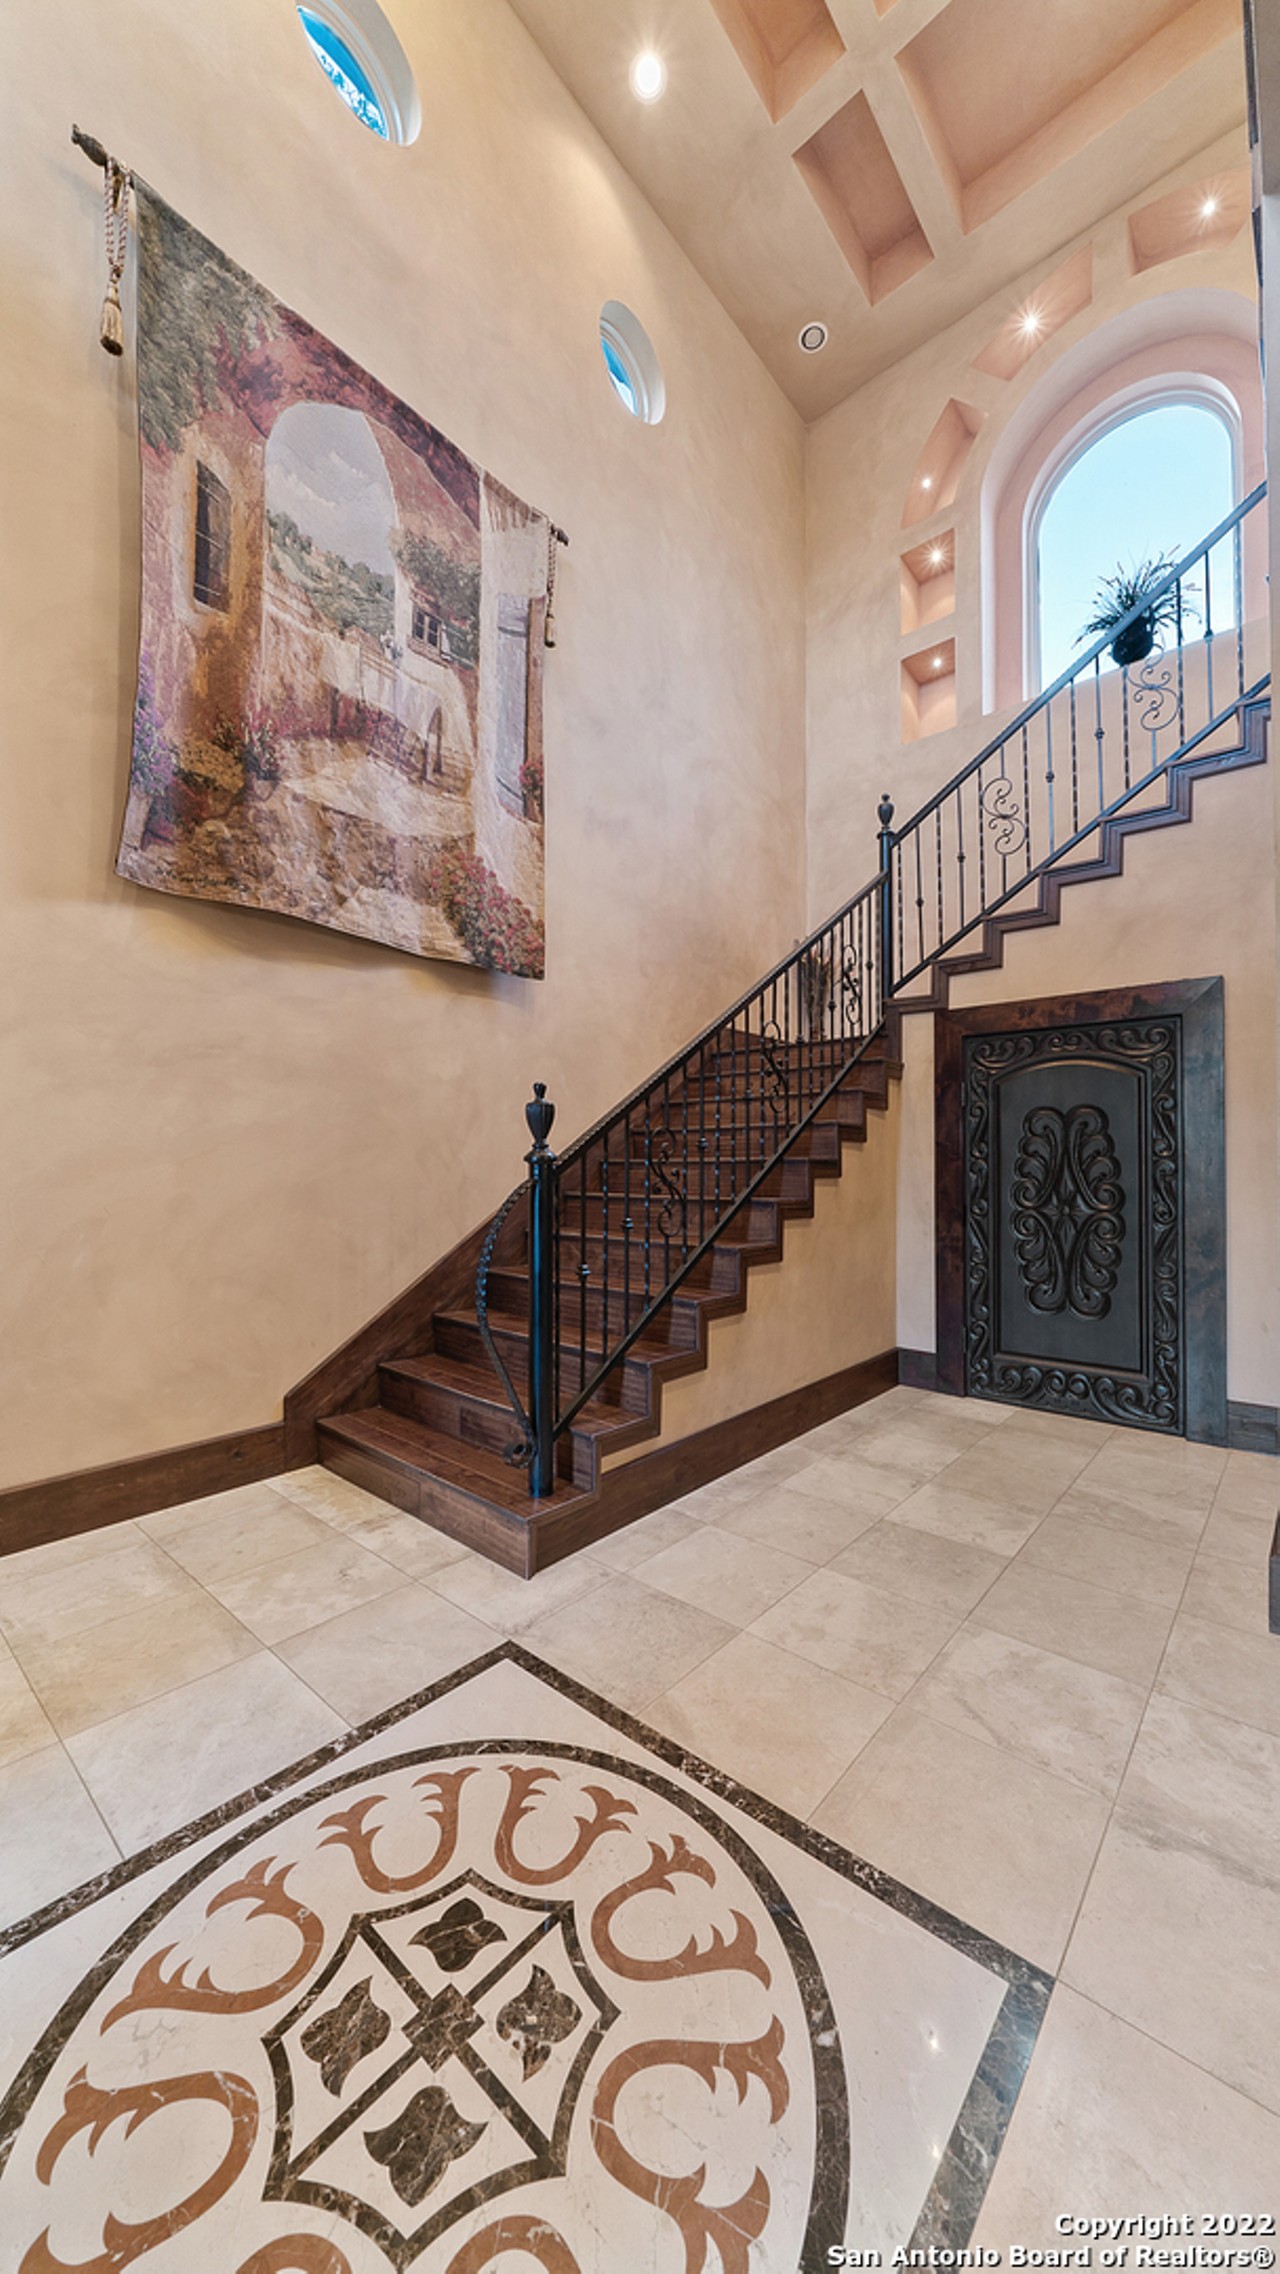 This San Antonio Mediterranean-style mansion comes with its own gym and a \wedding pavilion